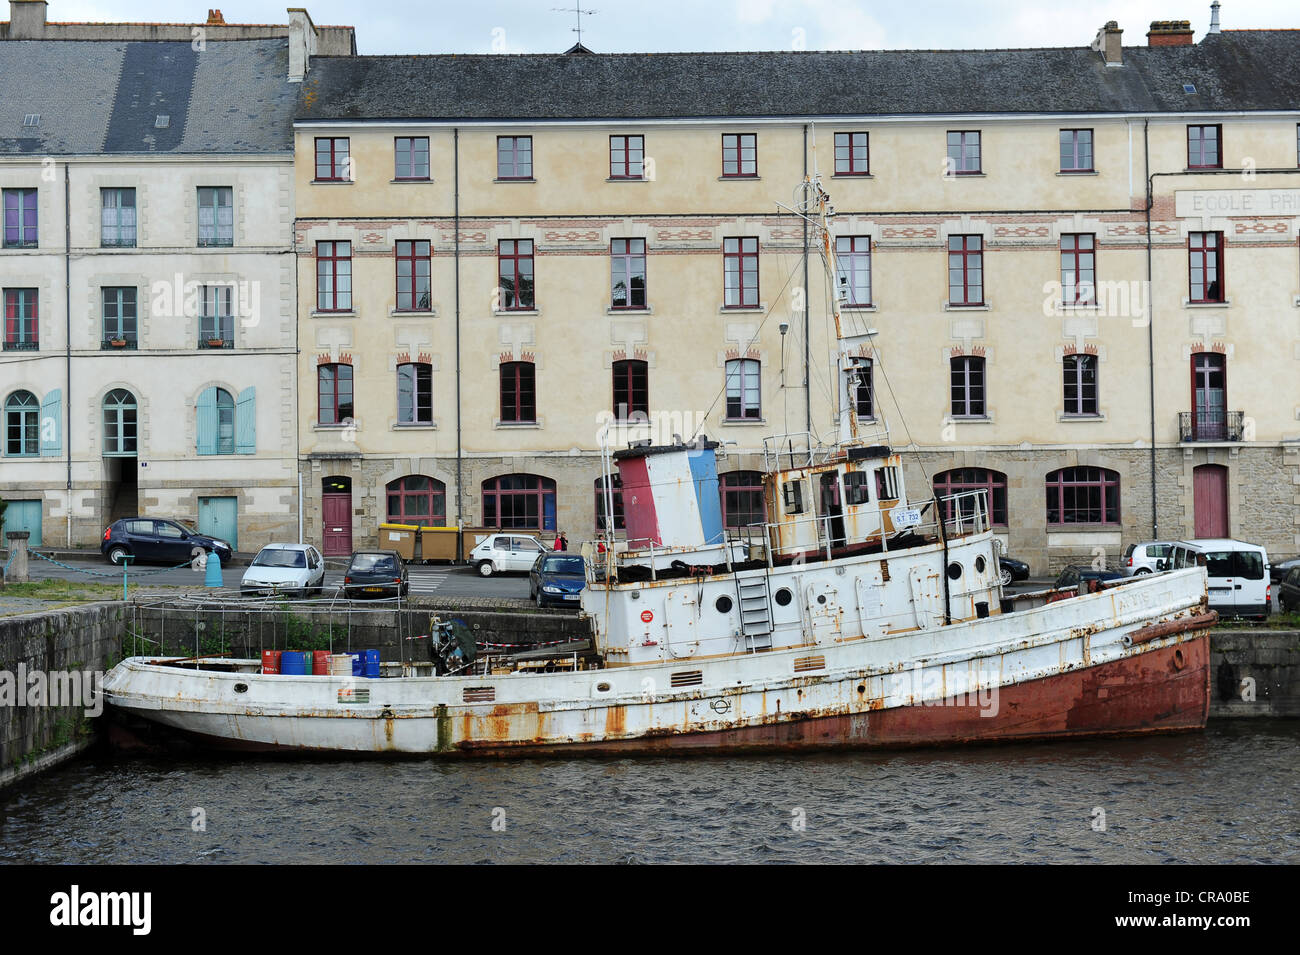 US World War 2 tug boat used in the D-Day Landing rotting away in Redon brittany france Stock Photo